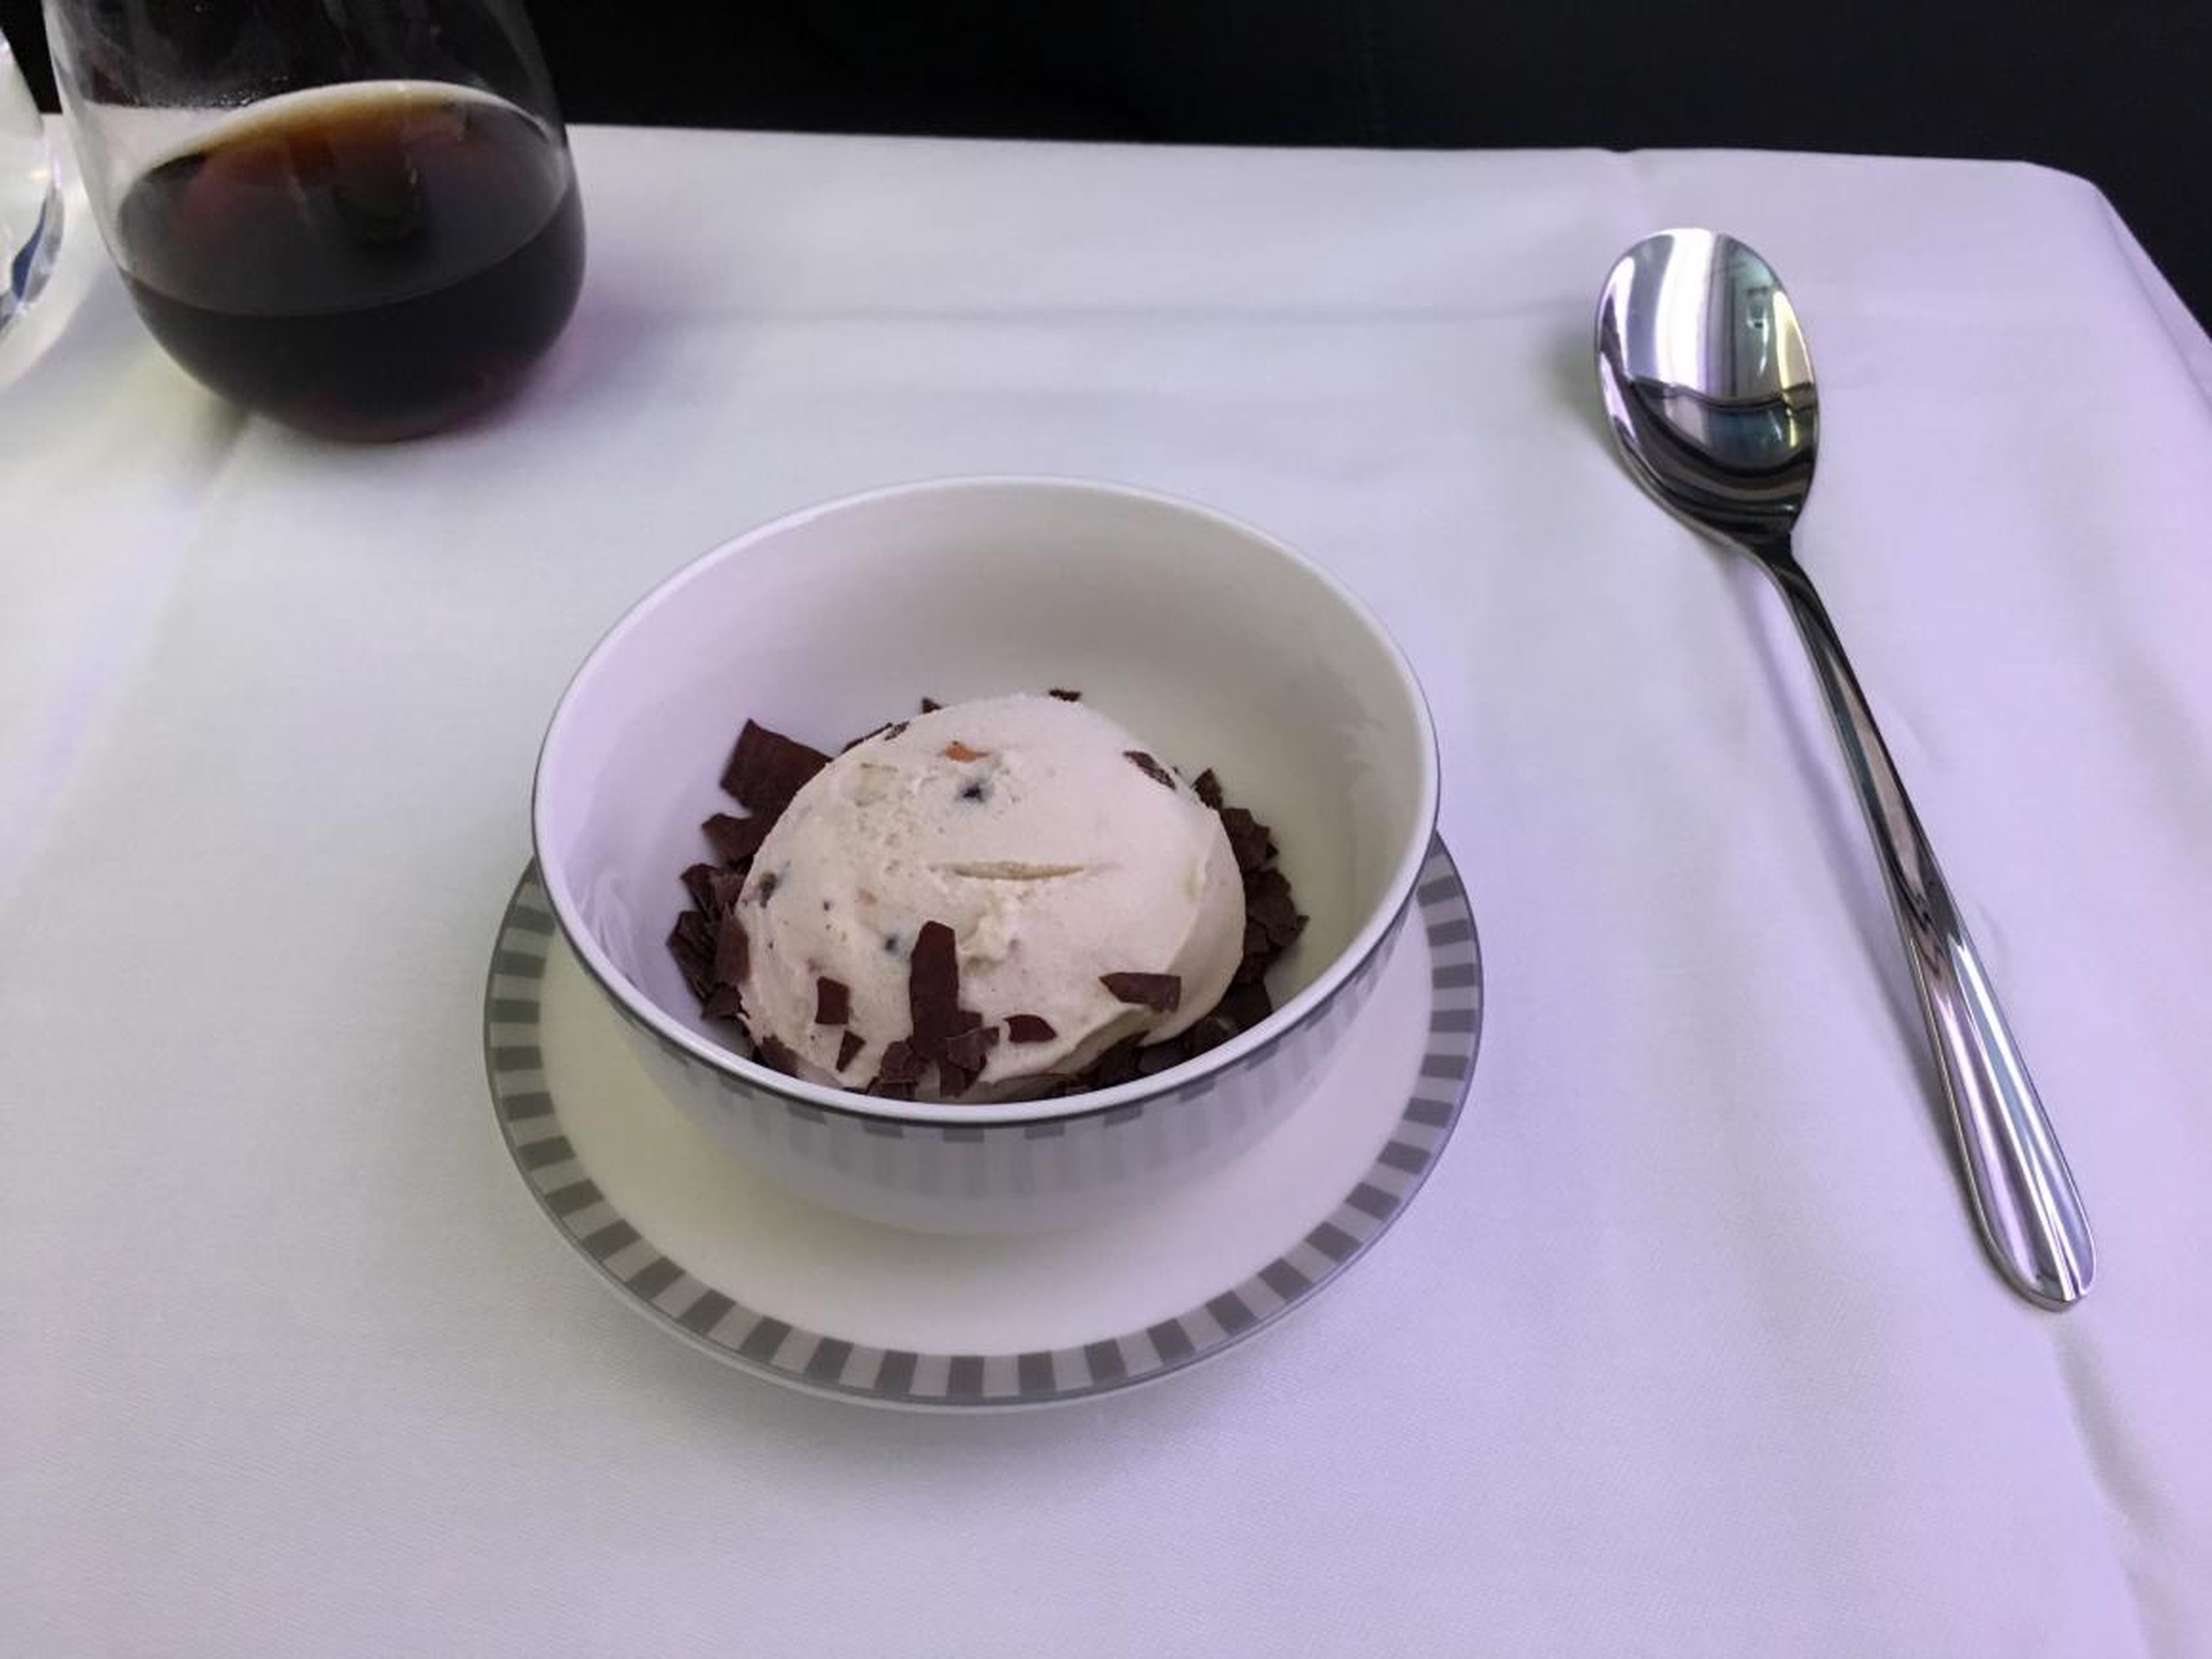 After the main course, dessert was served. Here's the cherry ice cream with chocolate shavings.